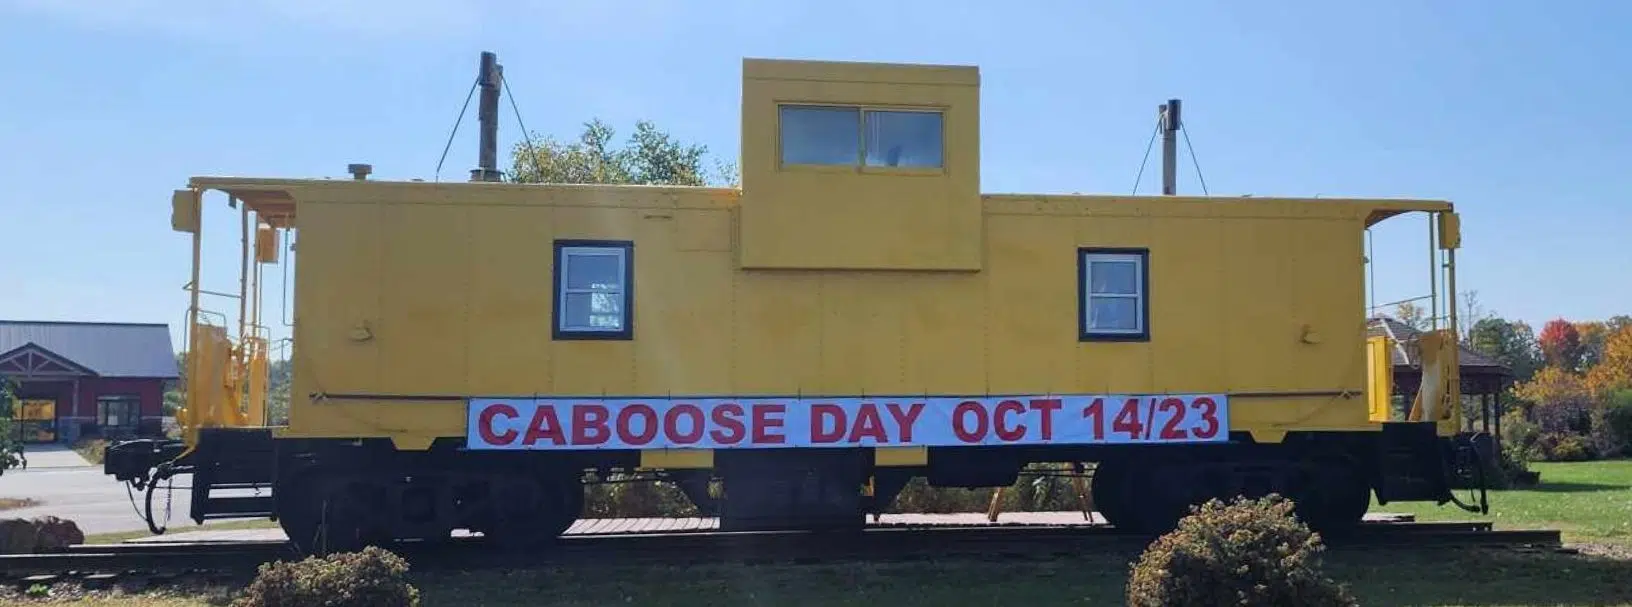 Caboose Day to celebrate and raise funds for restoration work on O'Brien  Road monument